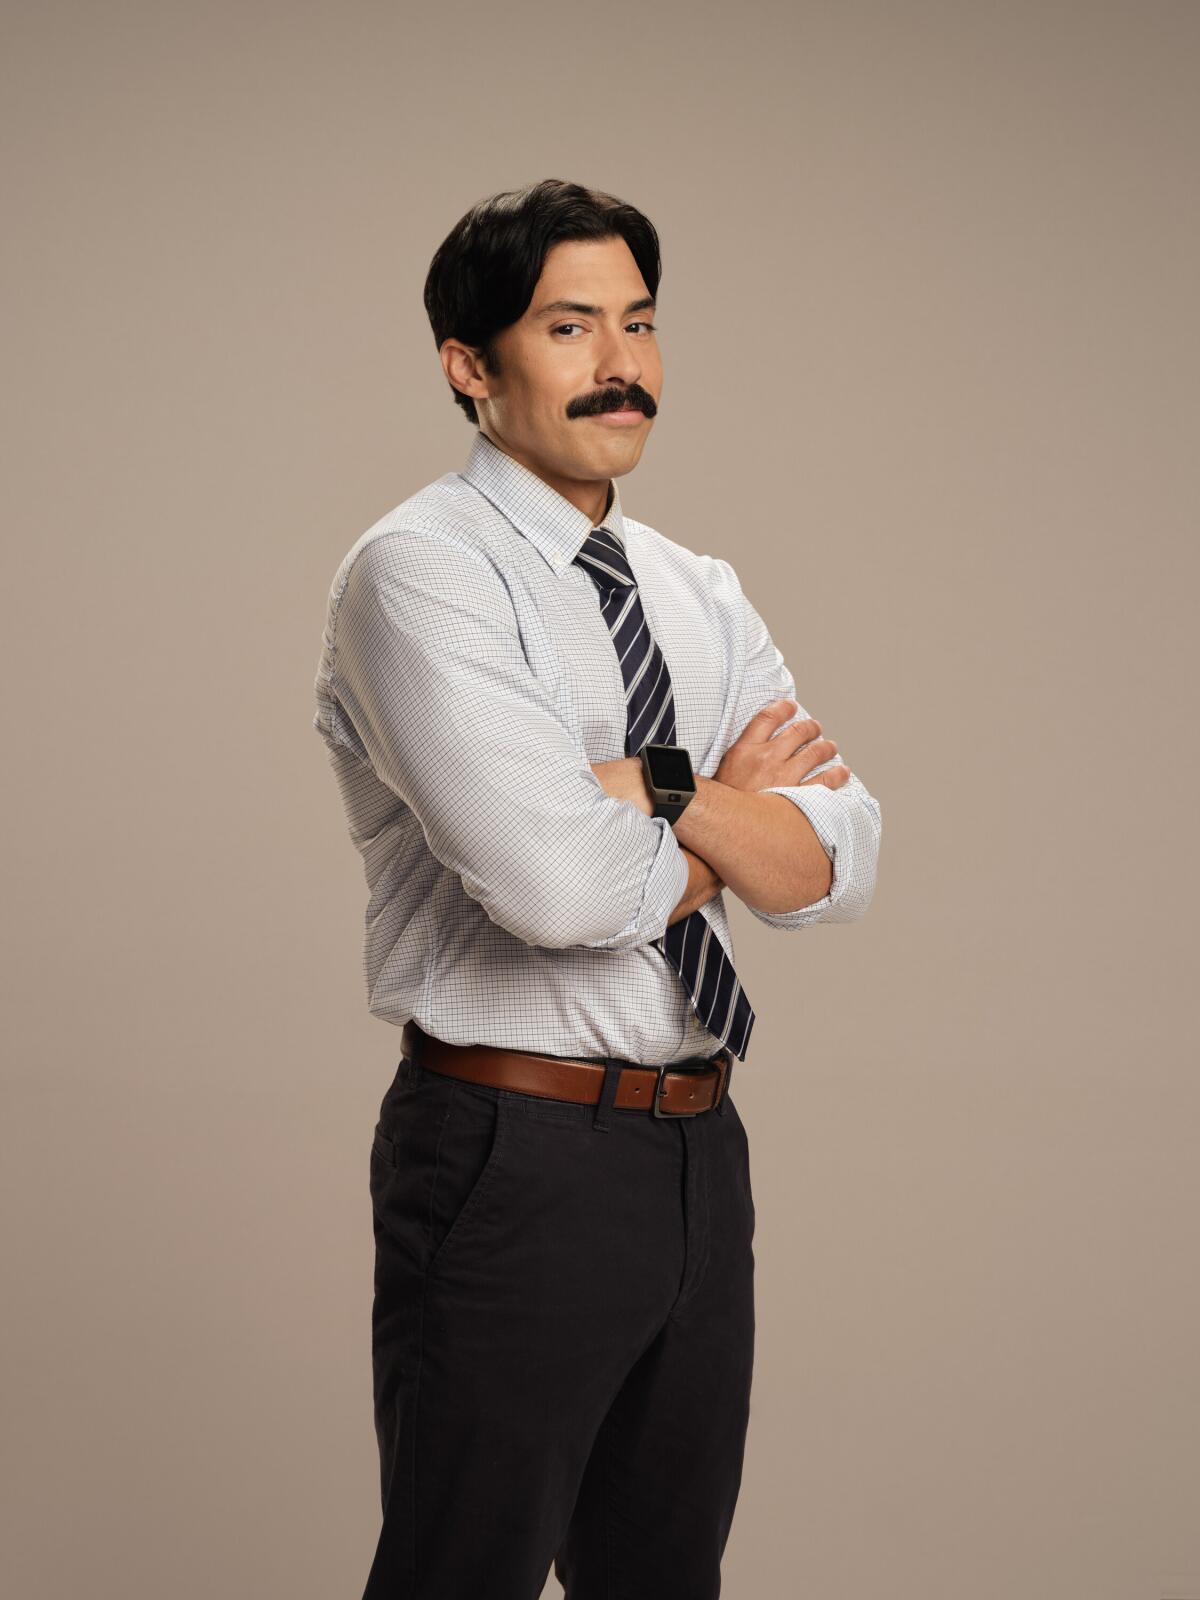 Carlos Santos dressed as his character Ryan, in a shirt, tie and dark slacks with a mustache.